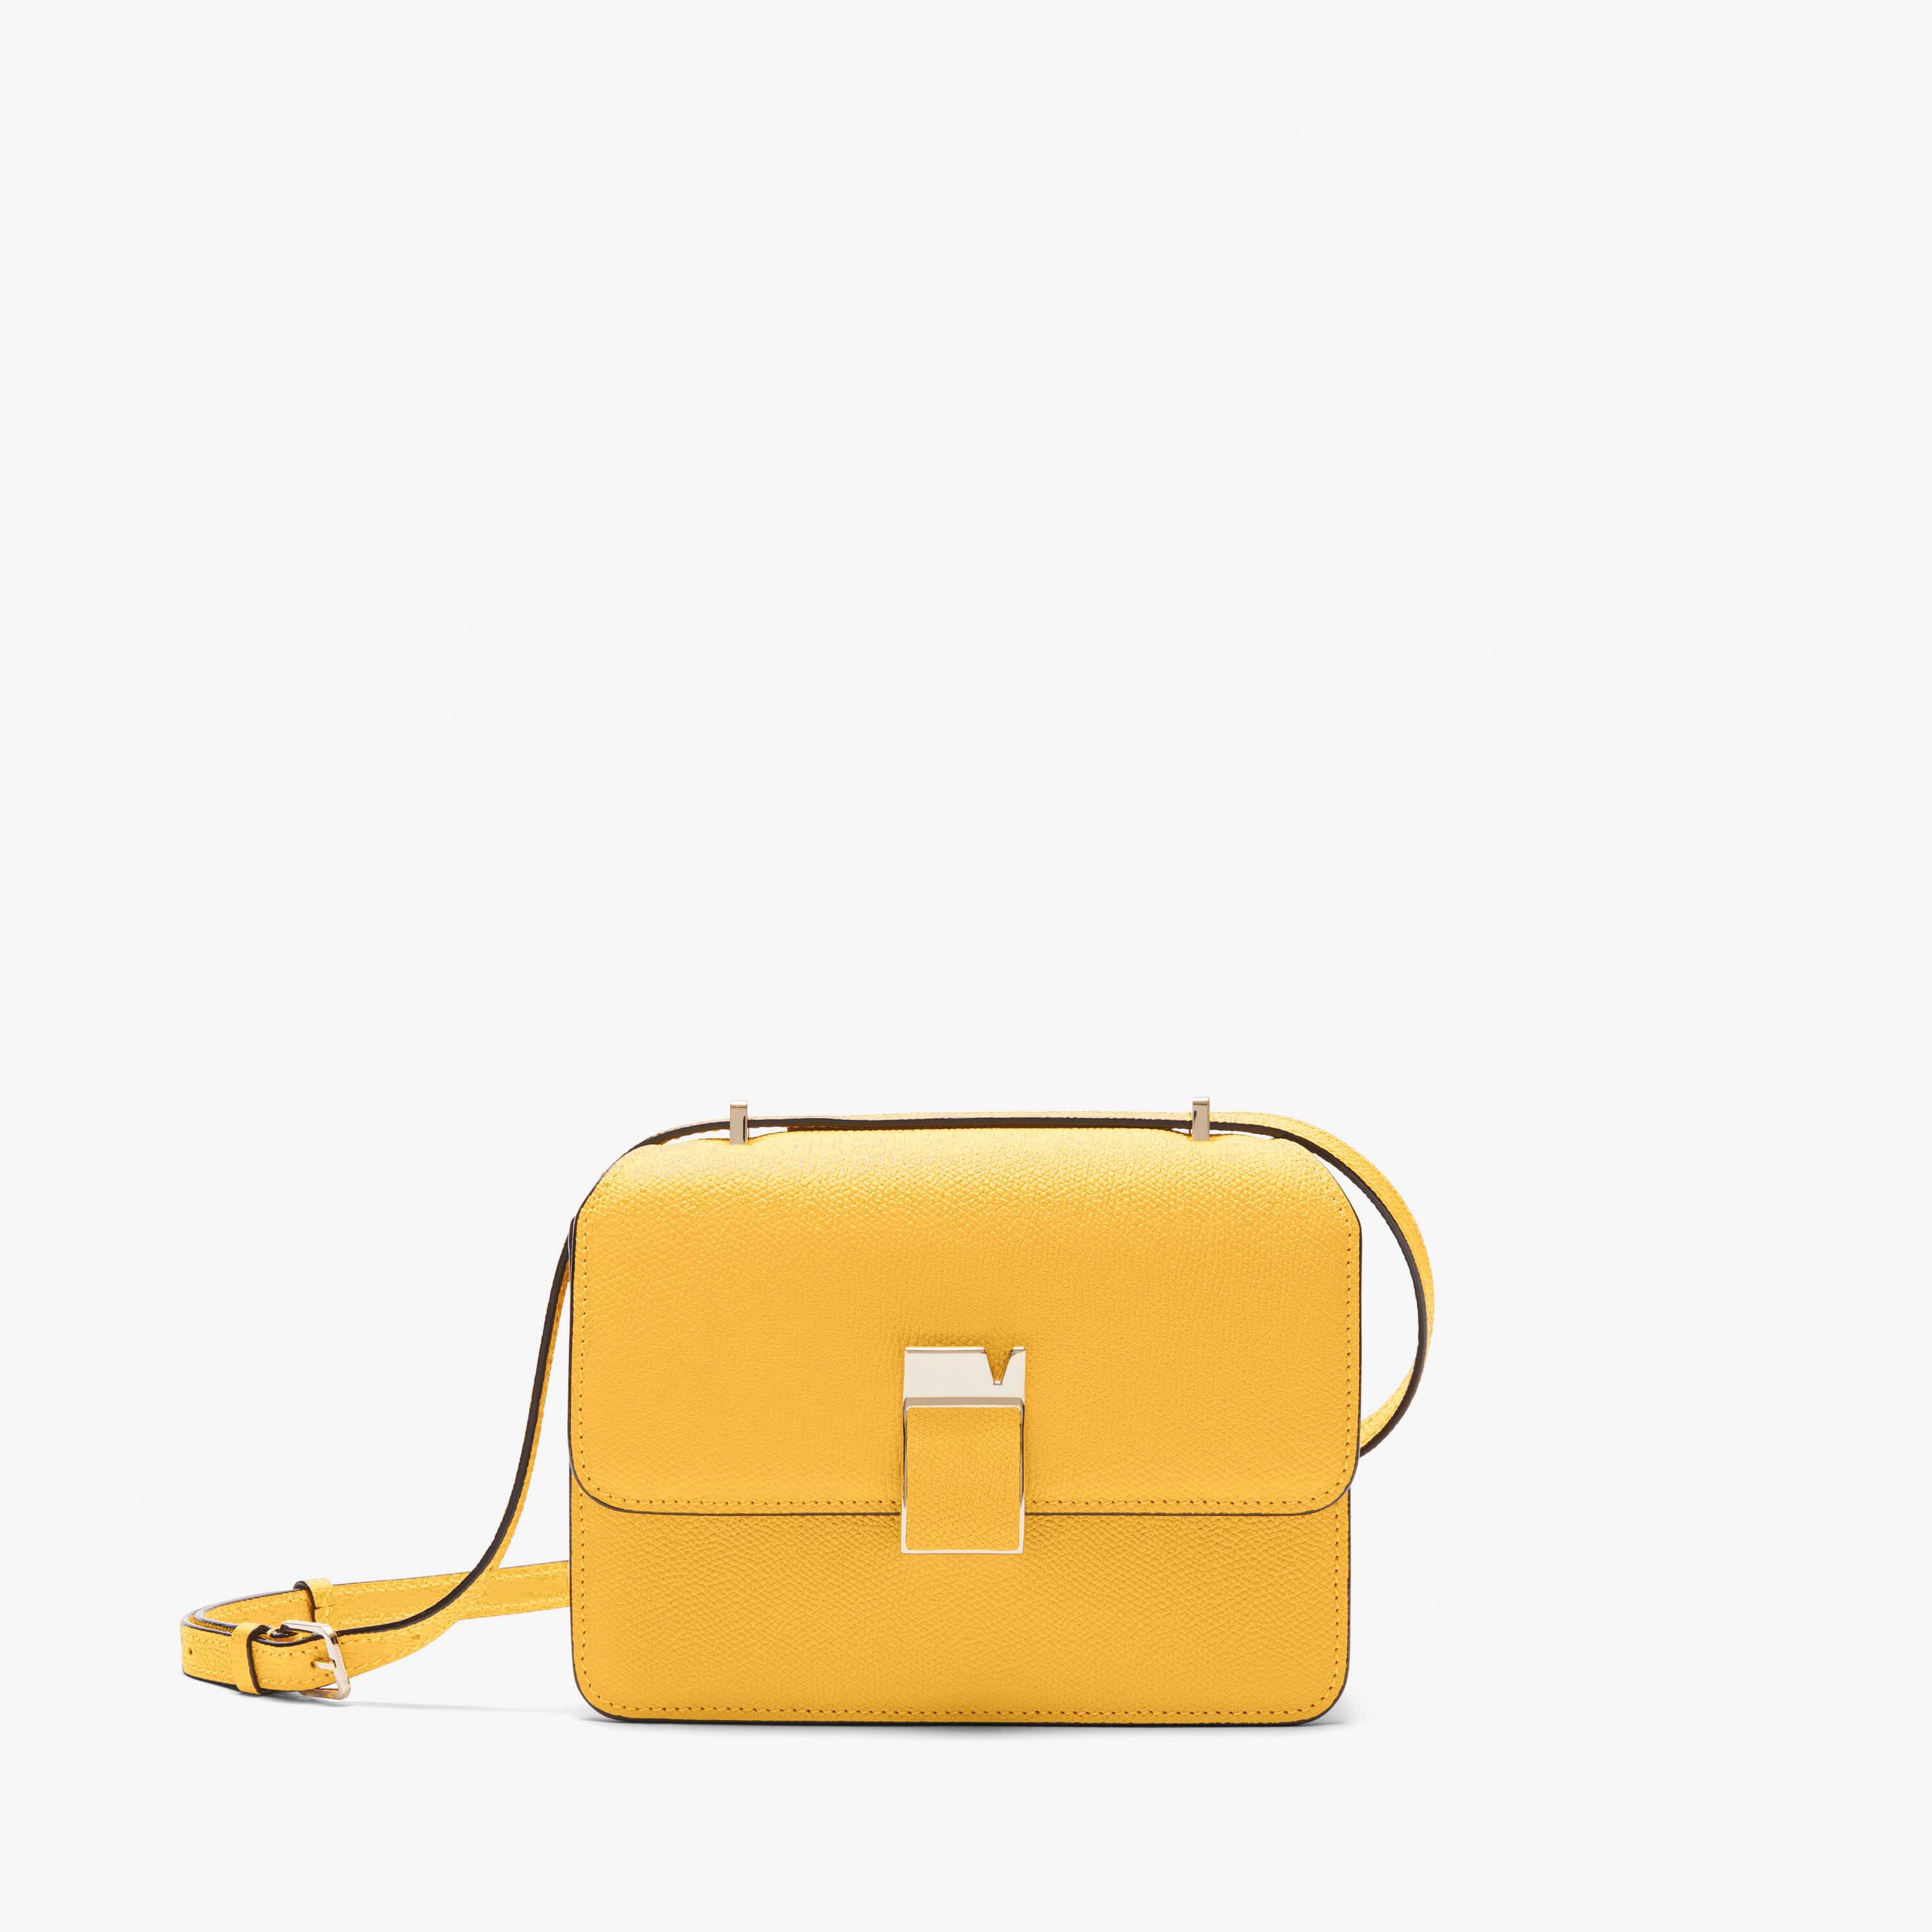 SMALL HANDBAG NOLO WITH FLAP CALF LEATHER VS LIGHT GOLD,JS,large